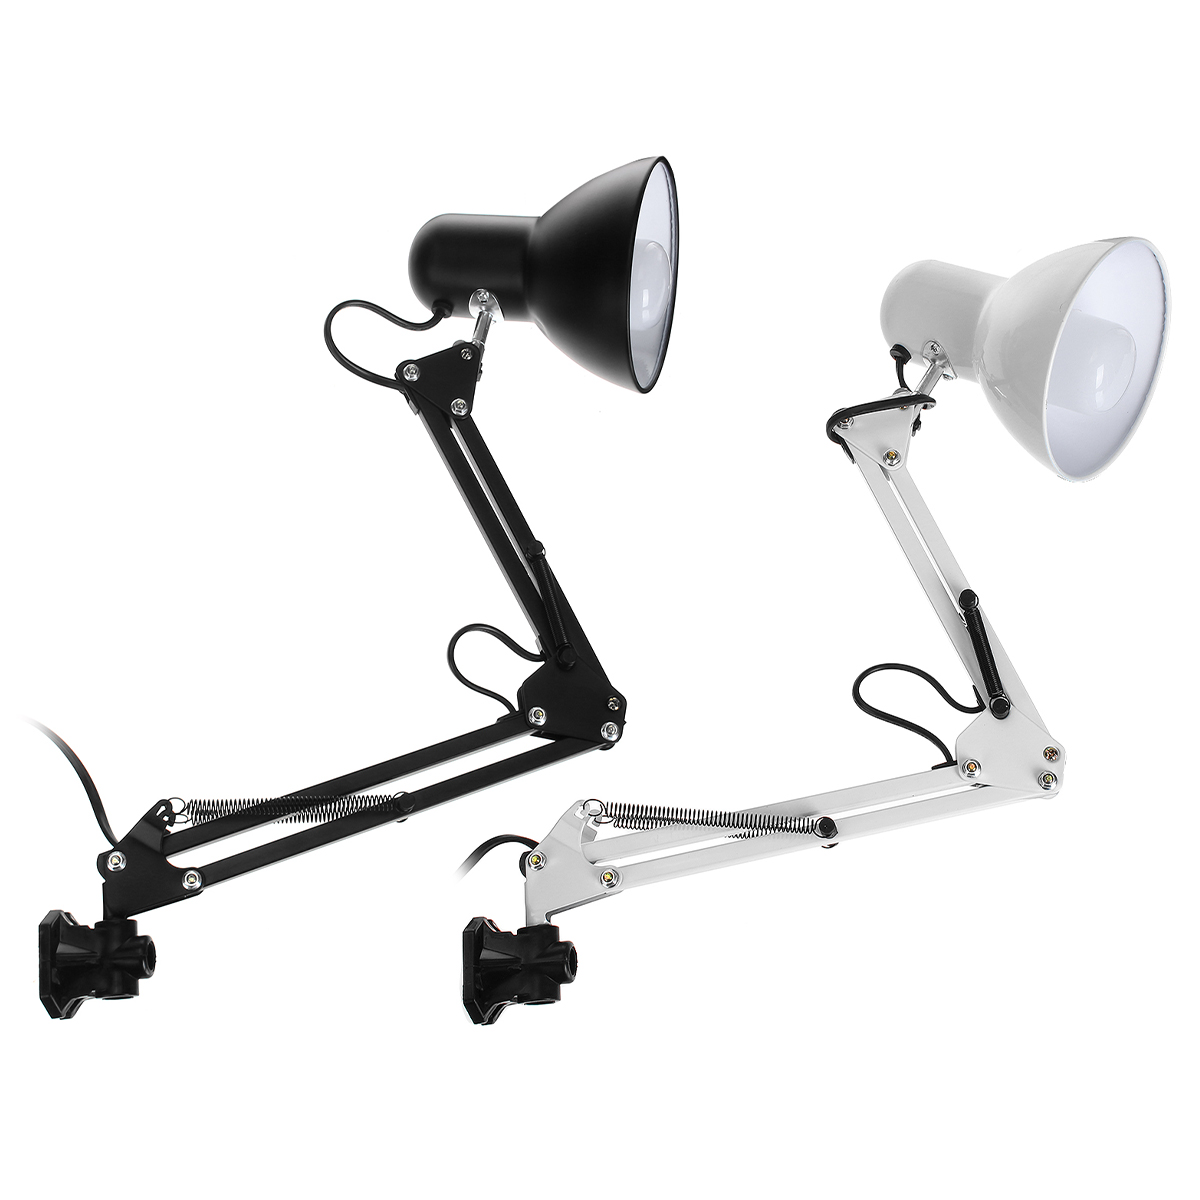 5W-Super-Bright-Swing-Arm-Desk-Lamp-Clamp-on-Table-Light-with-LED-Bulb-Metal-Clip-220V-1742397-8